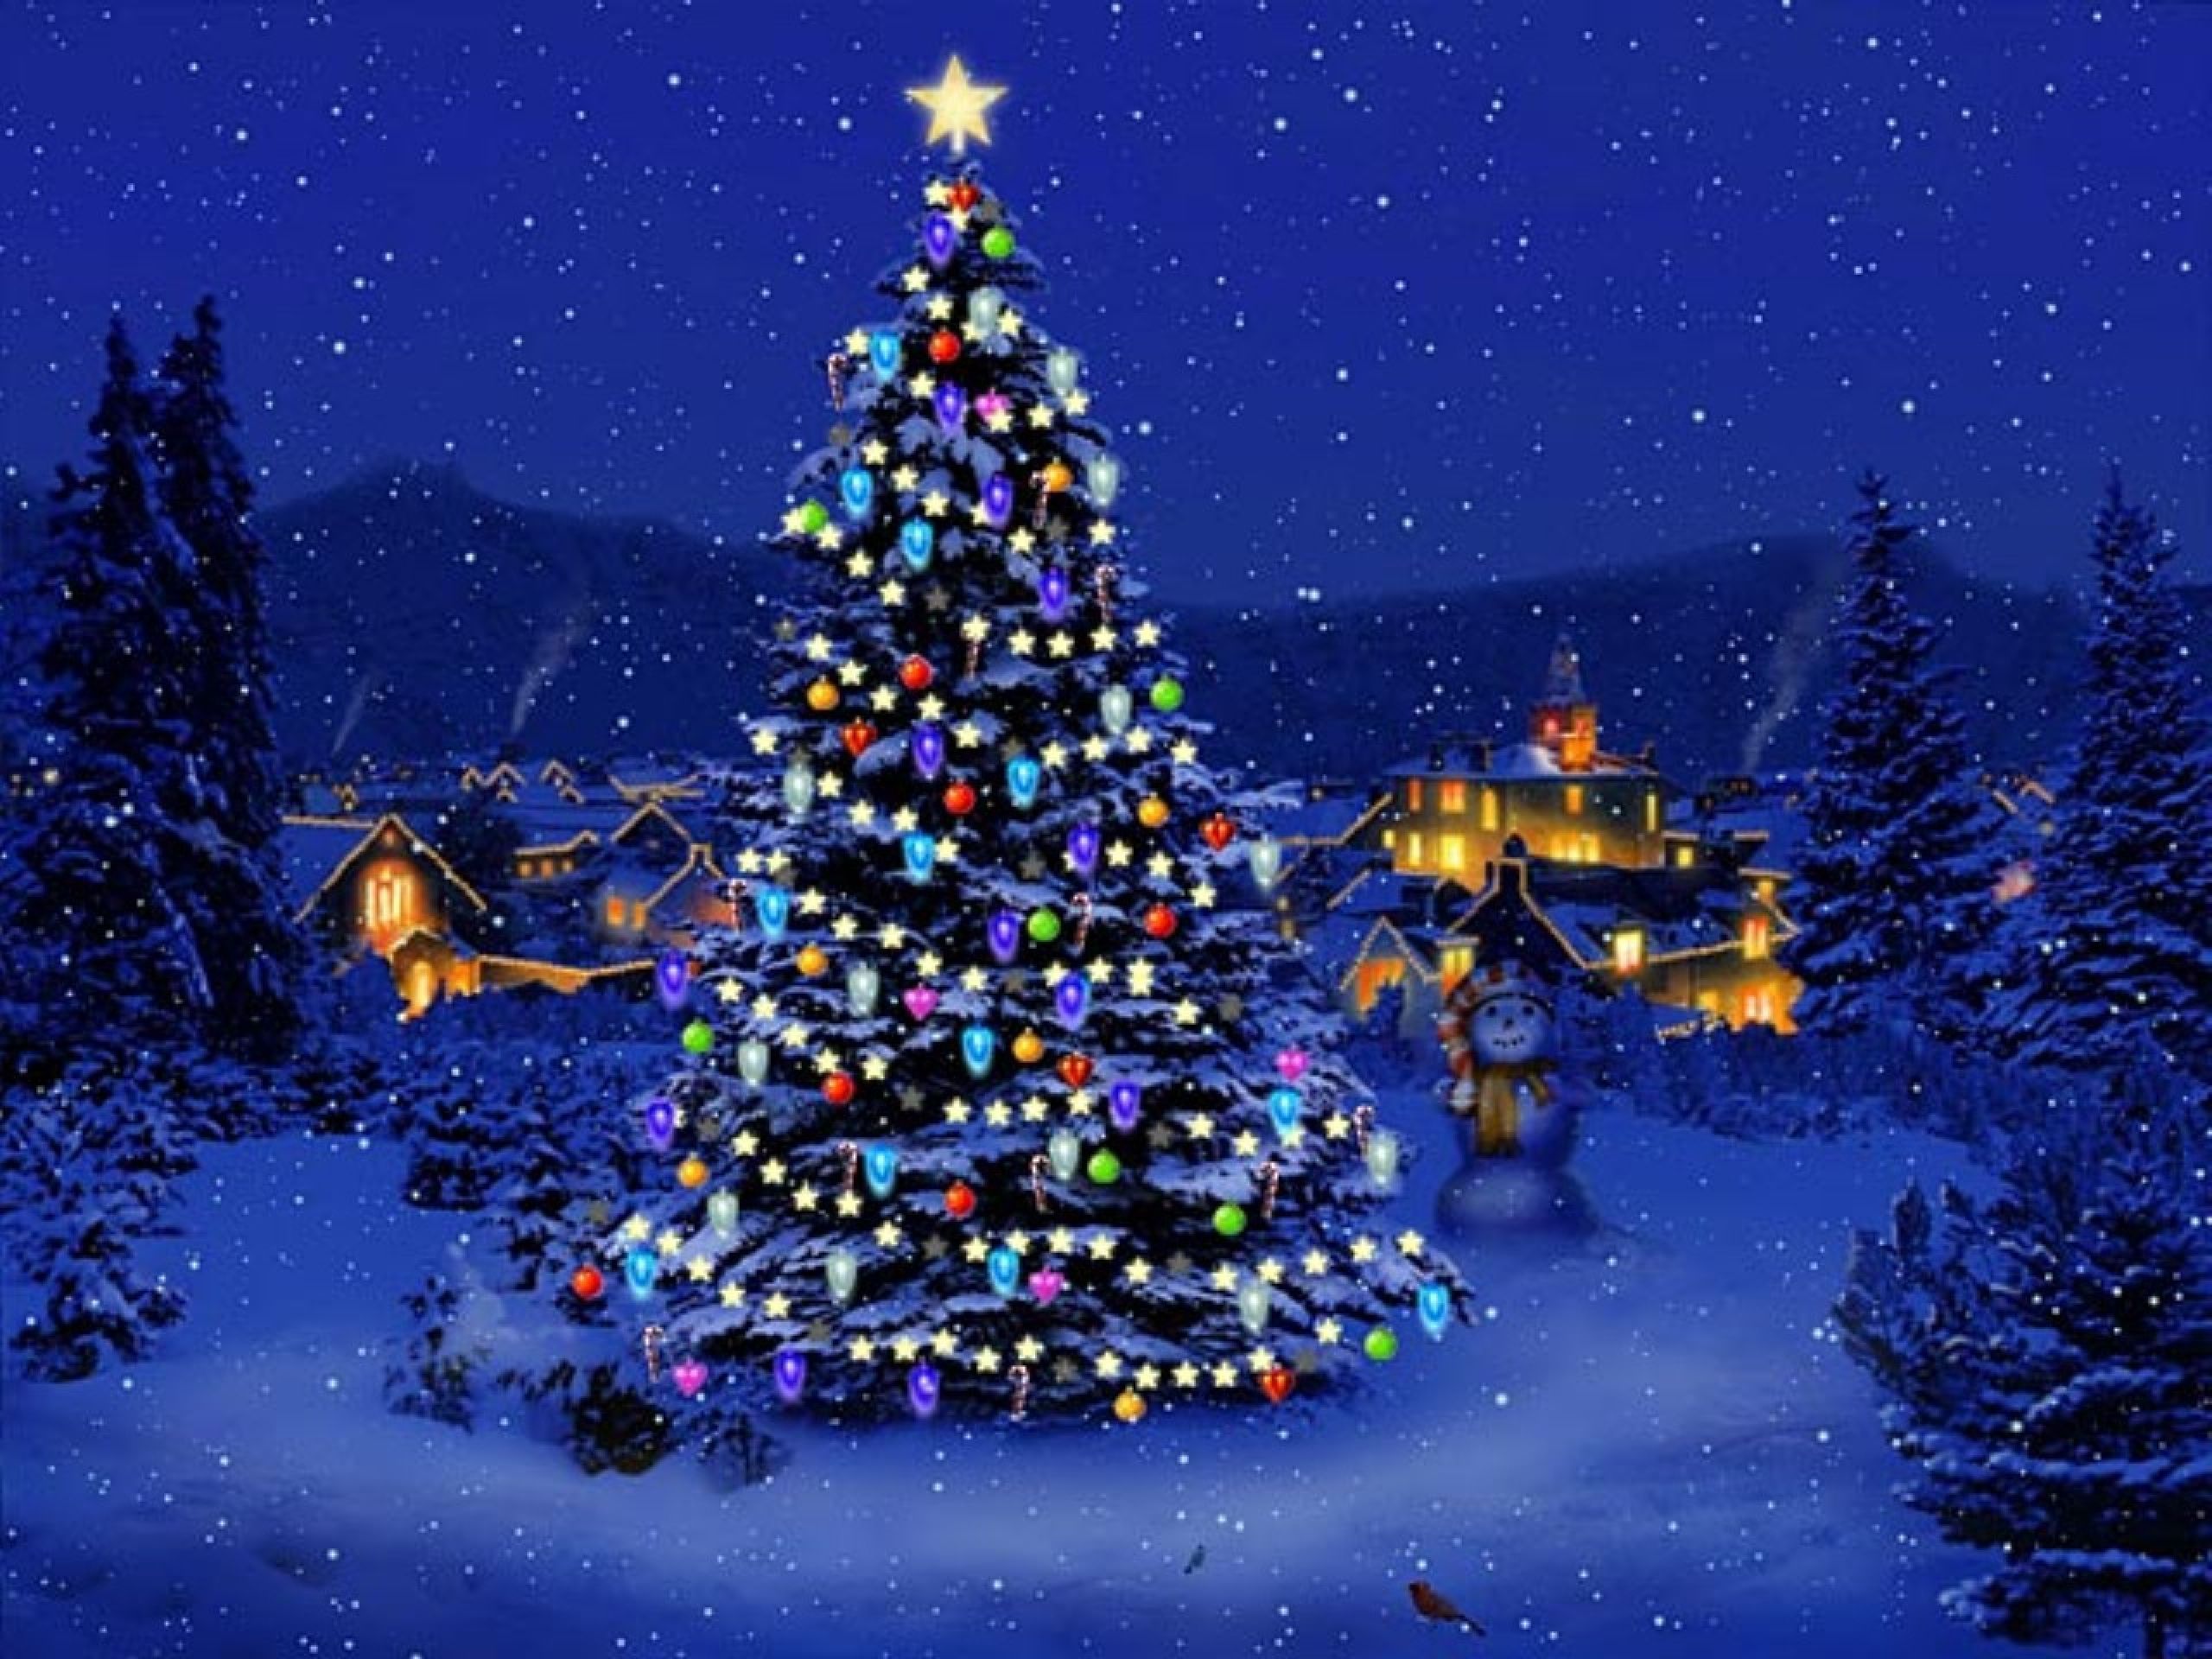 free christmas themes for windows 7. Download Wallpaper, Download 2560x1920 CHRISTMAS LIGHTS. Christmas tree image, 3D christmas tree, Christmas tree wallpaper